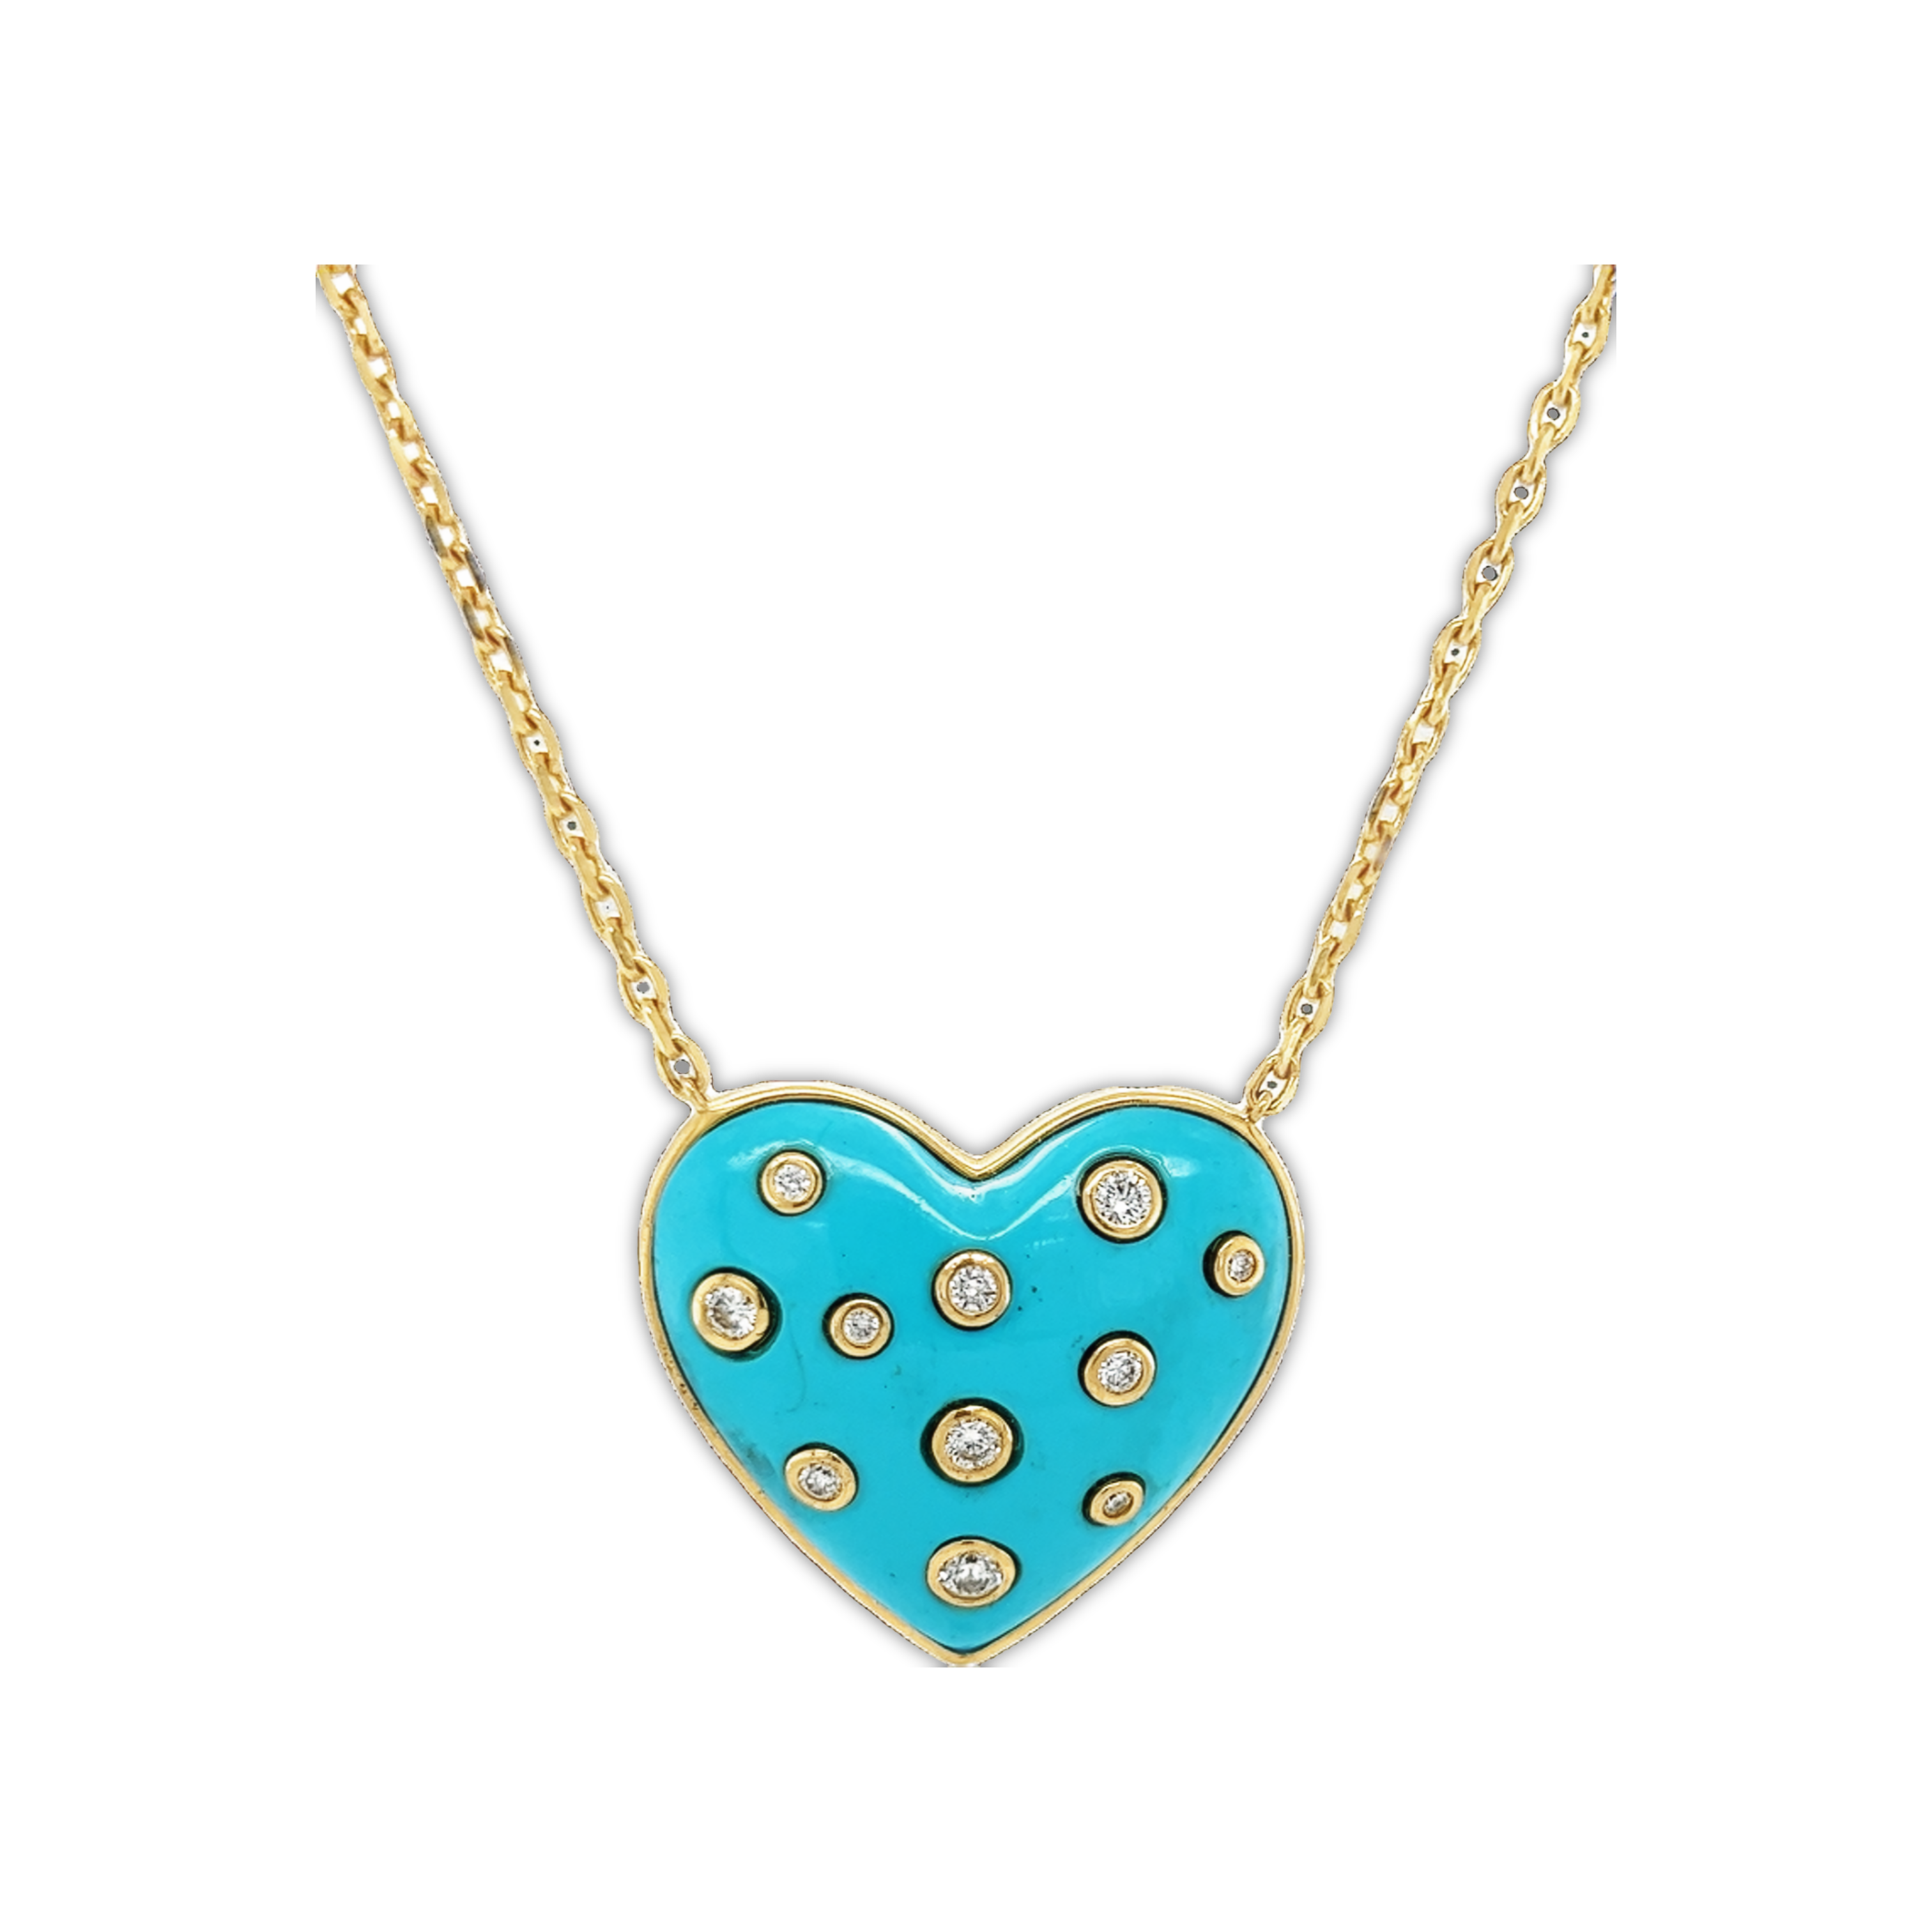 Featured image for “Diamond Embellished Turquoise Heart”